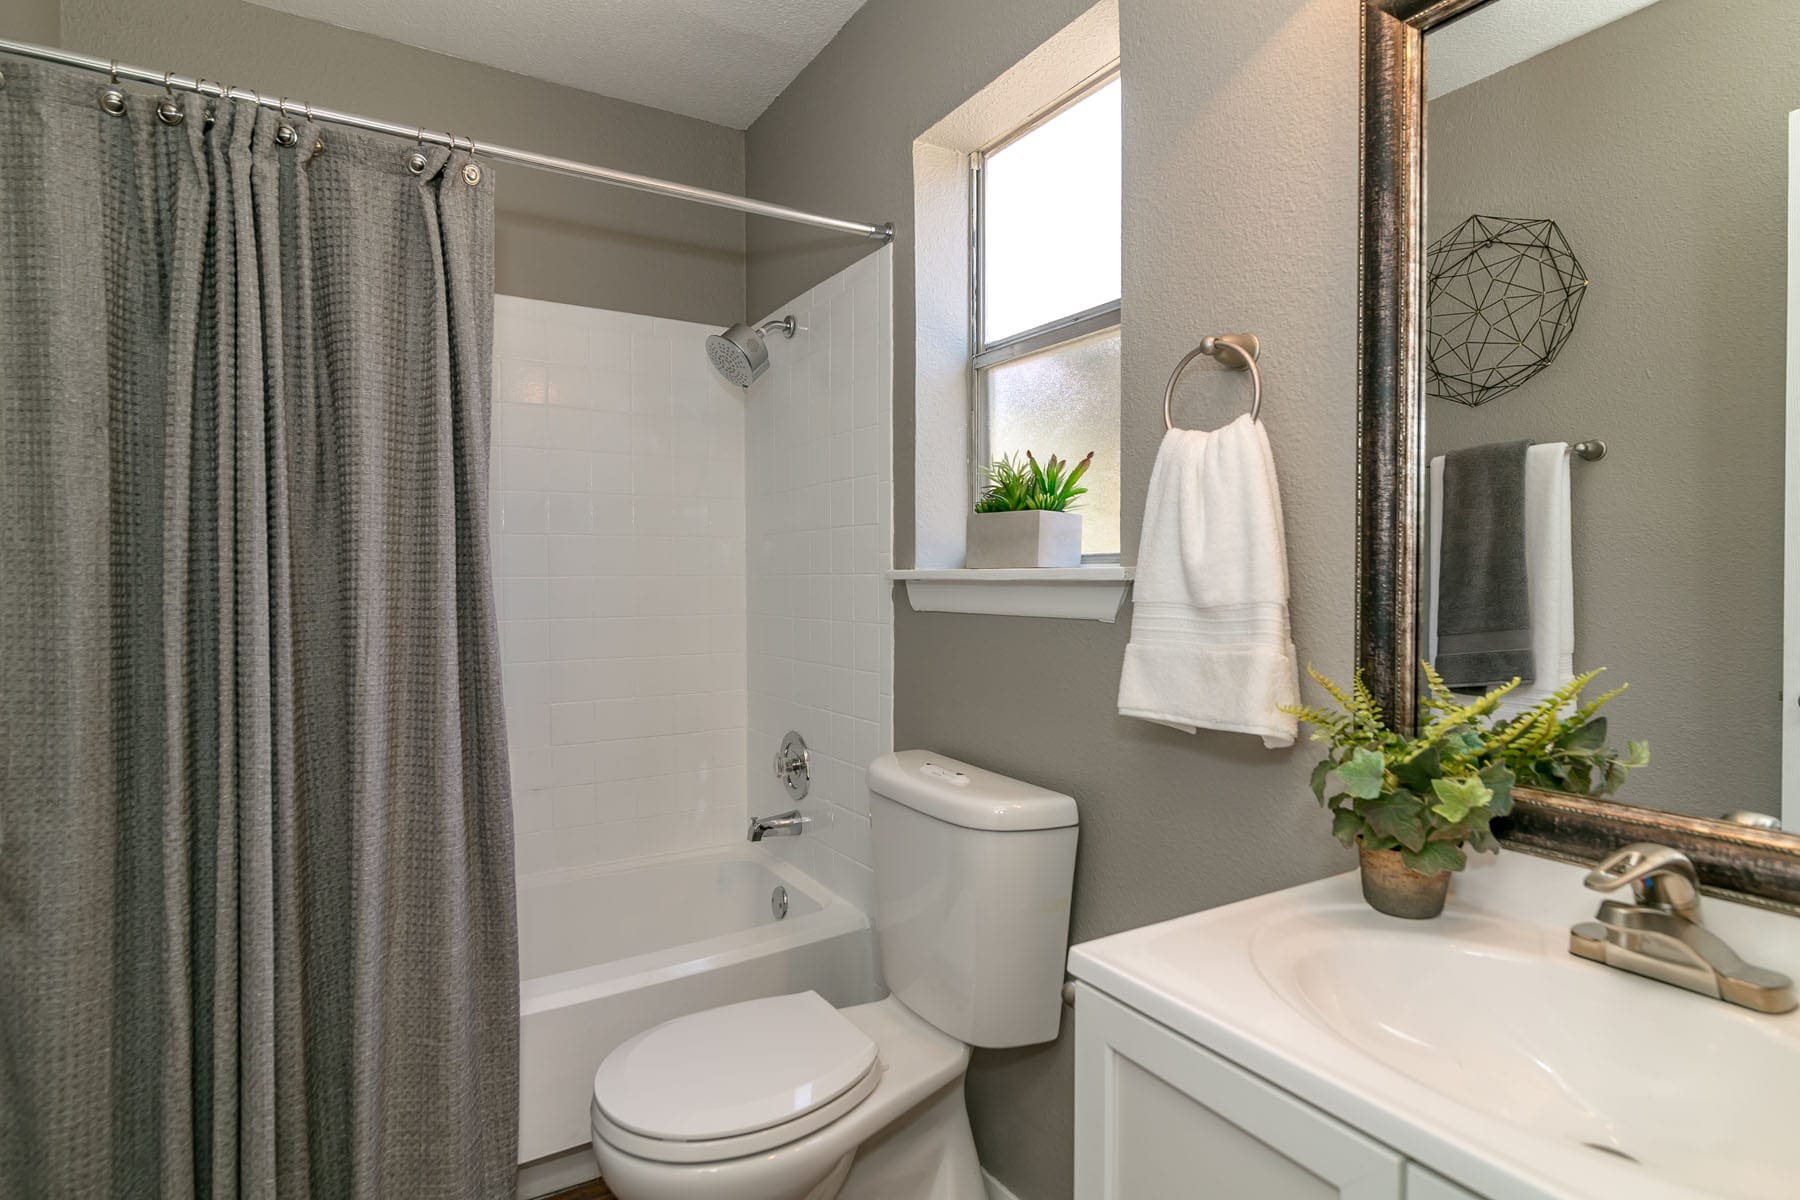 Apartments for Rent San Antonio TX - City-Base Vista - Modern Bathroom With a Tall Mirror and Sink, an Obscured Styled Window, and a Shower With a Curtain